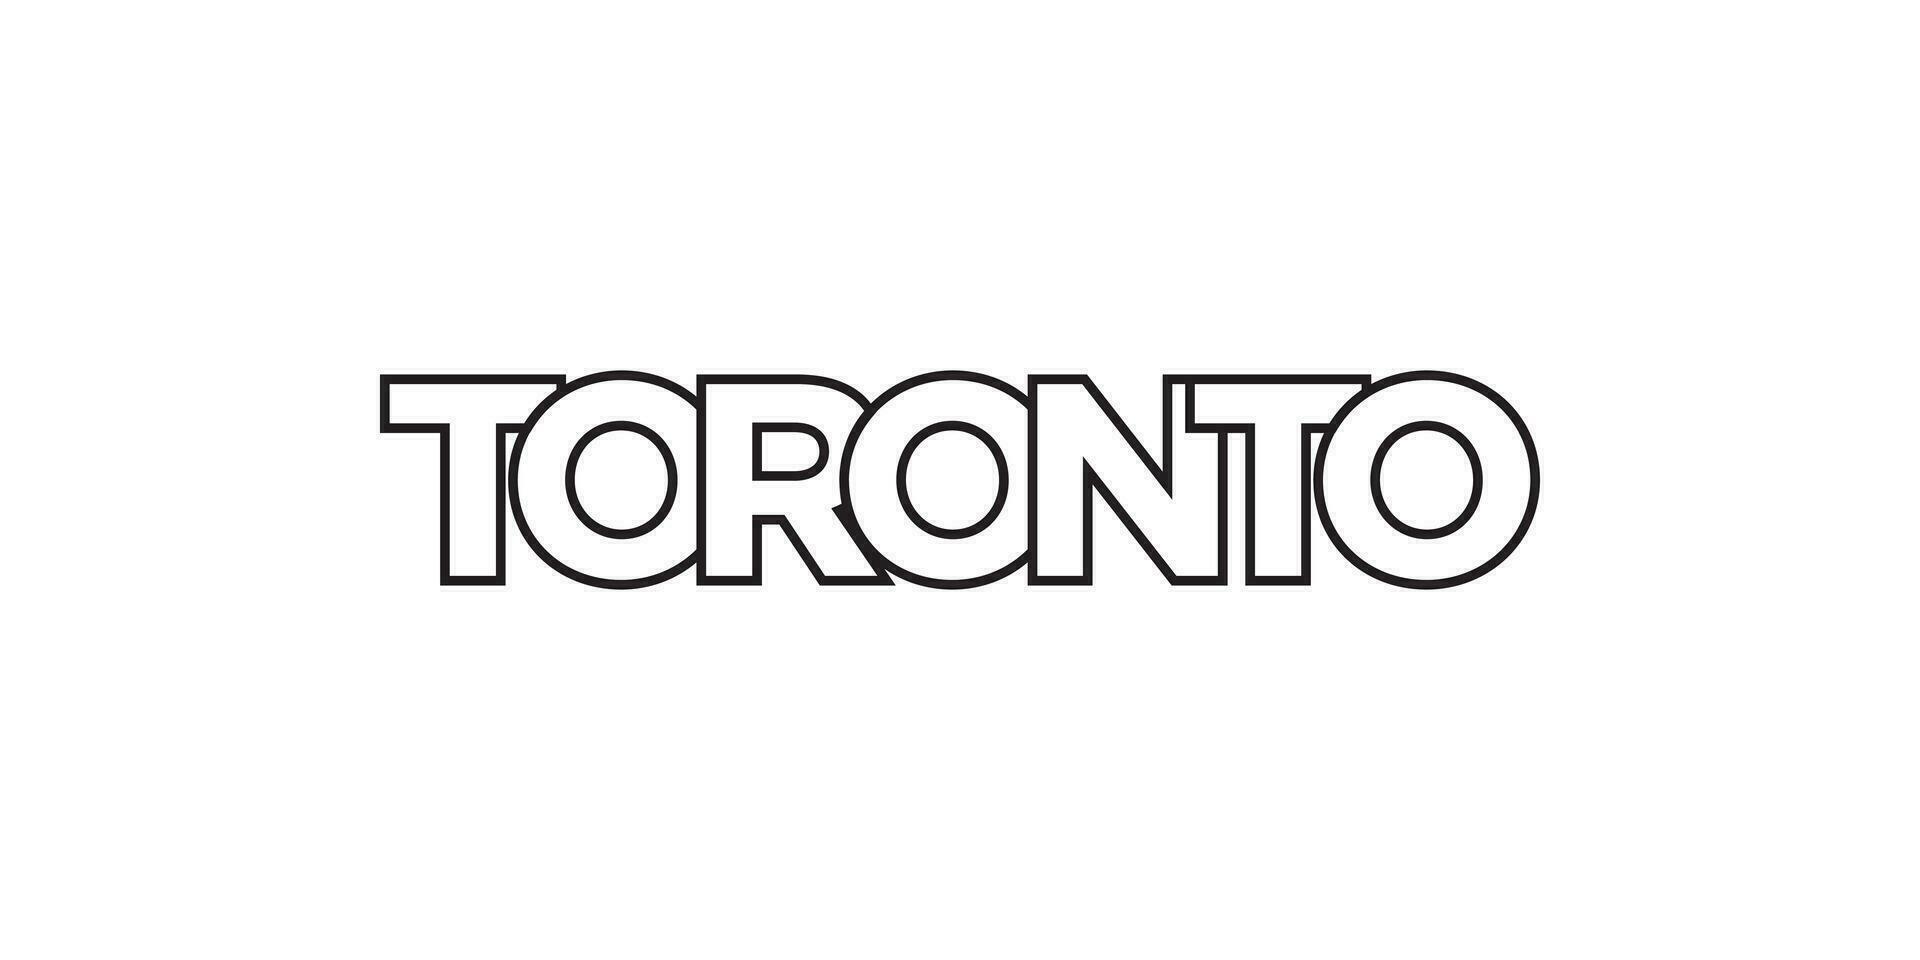 Toronto in the Canada emblem. The design features a geometric style, vector illustration with bold typography in a modern font. The graphic slogan lettering.